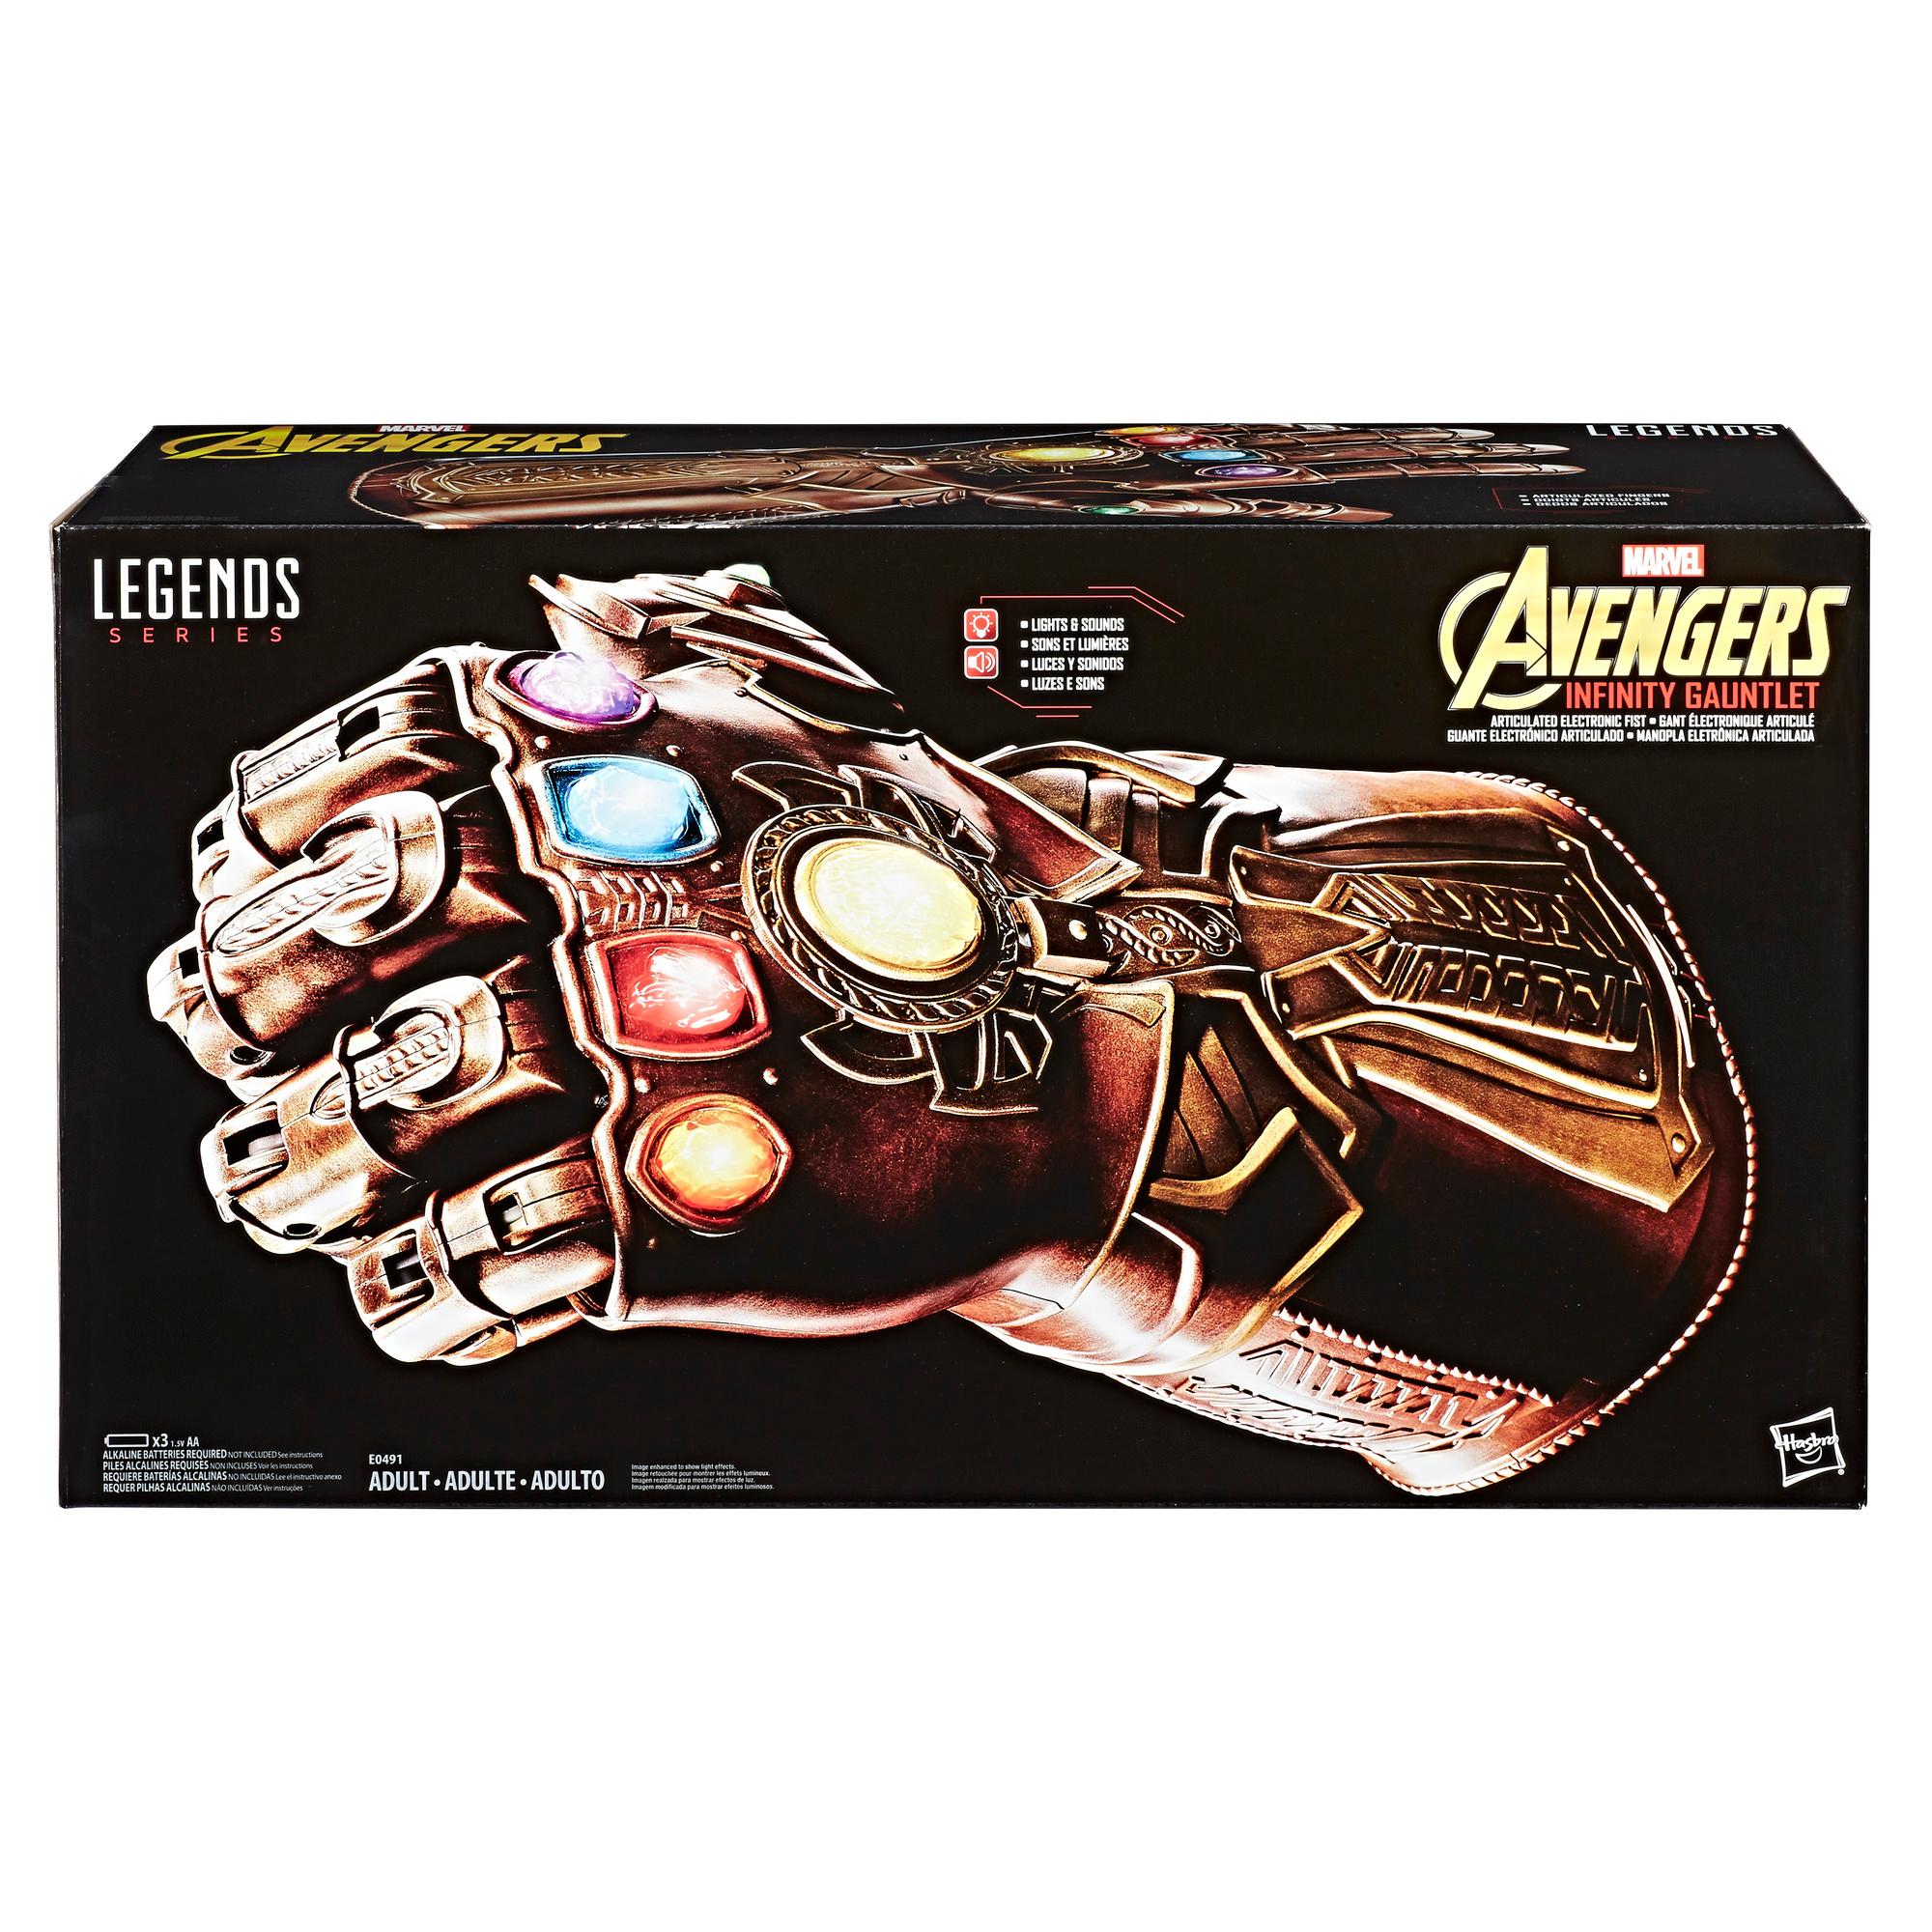 Infinity Gauntlet Articulated Electronic Fist NEW Marvel Legends Series 